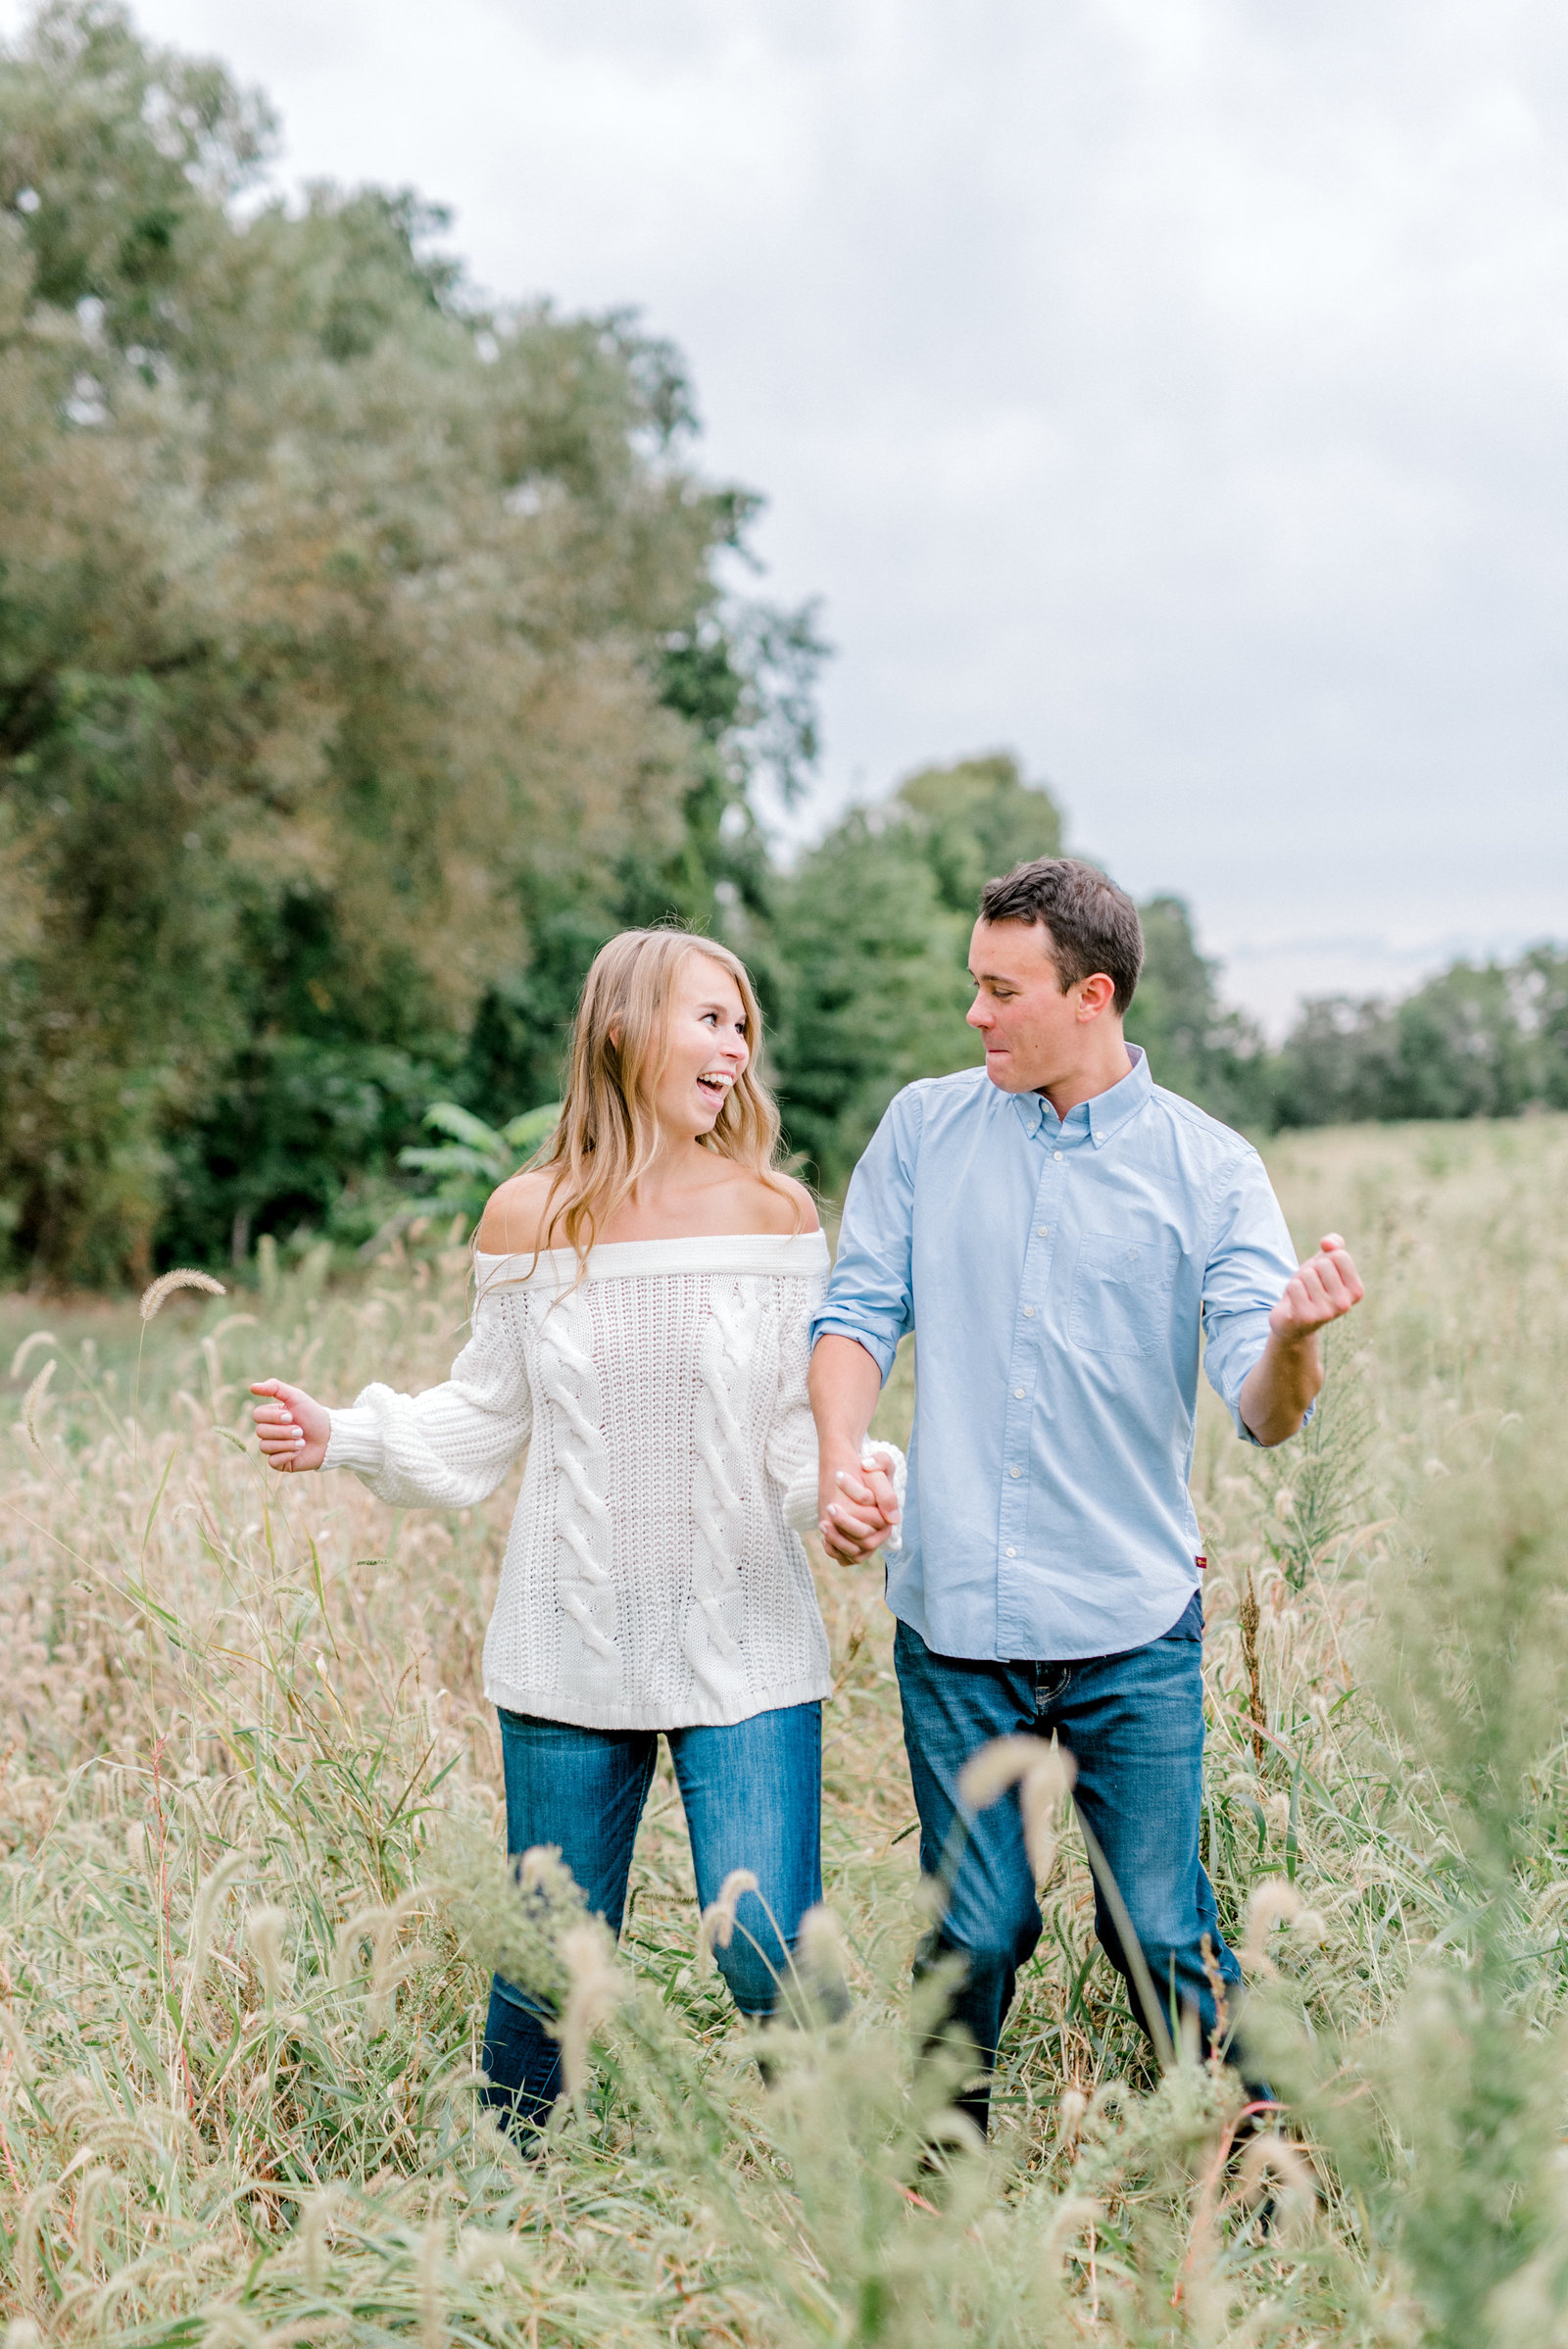 Quincy Cellars Engagement Session